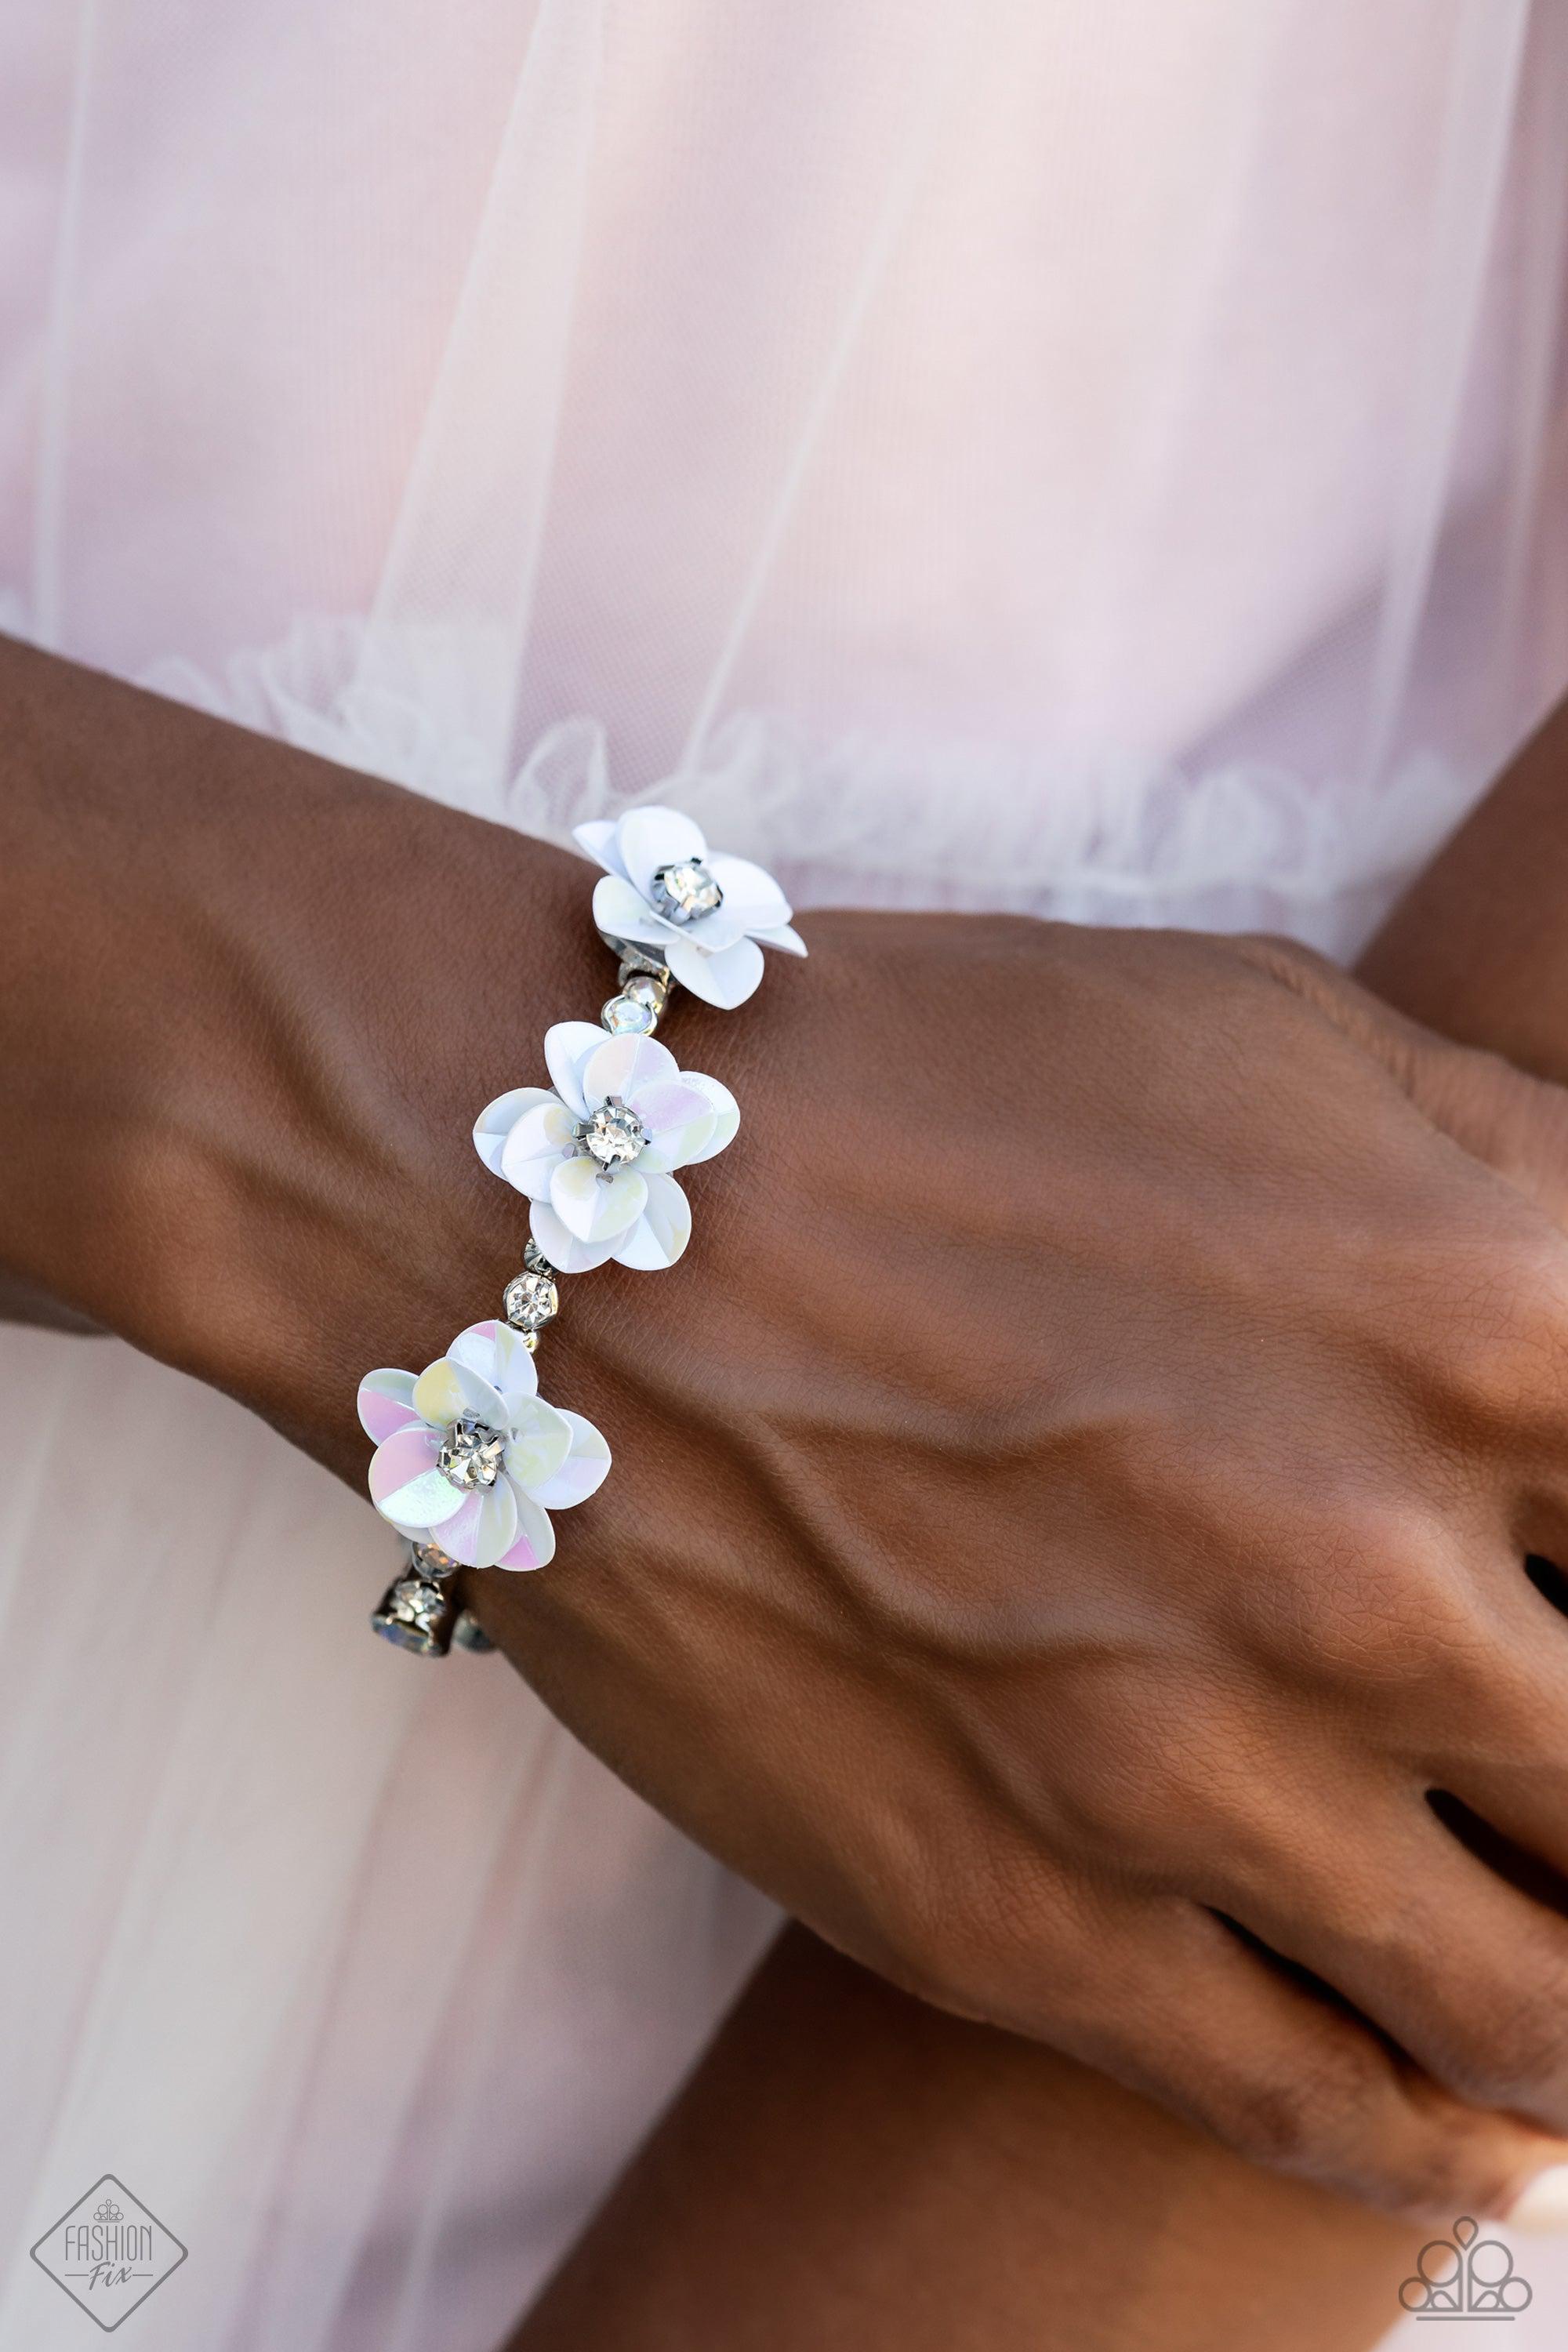 Endlessly Ethereal Multi Floral Coil Bracelet - Paparazzi Accessories- lightbox - CarasShop.com - $5 Jewelry by Cara Jewels